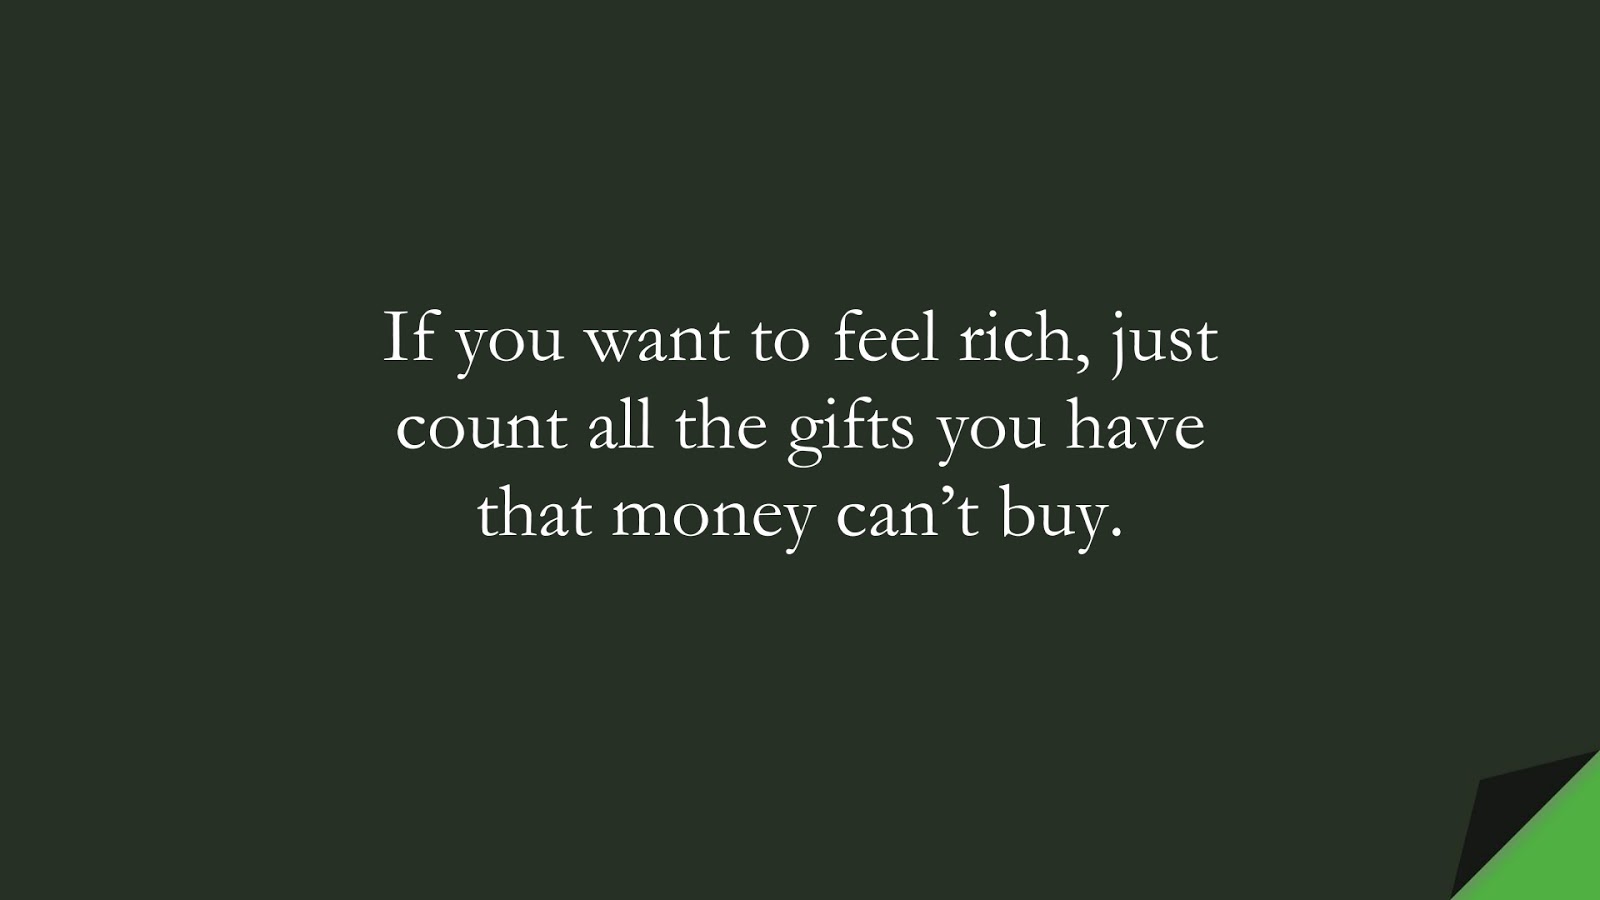 If you want to feel rich, just count all the gifts you have that money can’t buy.FALSE